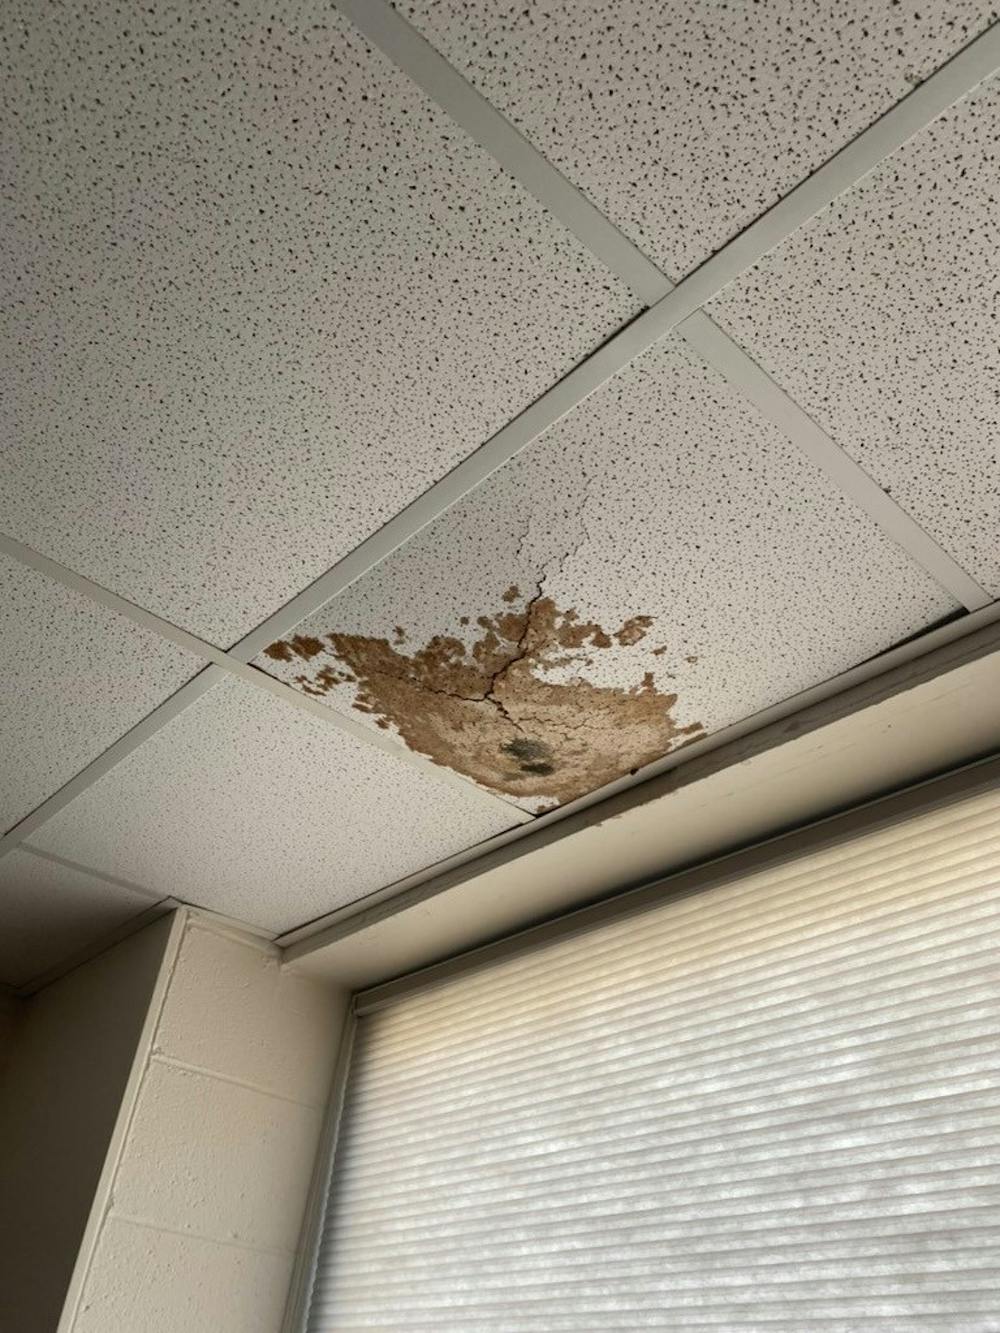 Students raise health concerns about mold in McDowell Hall